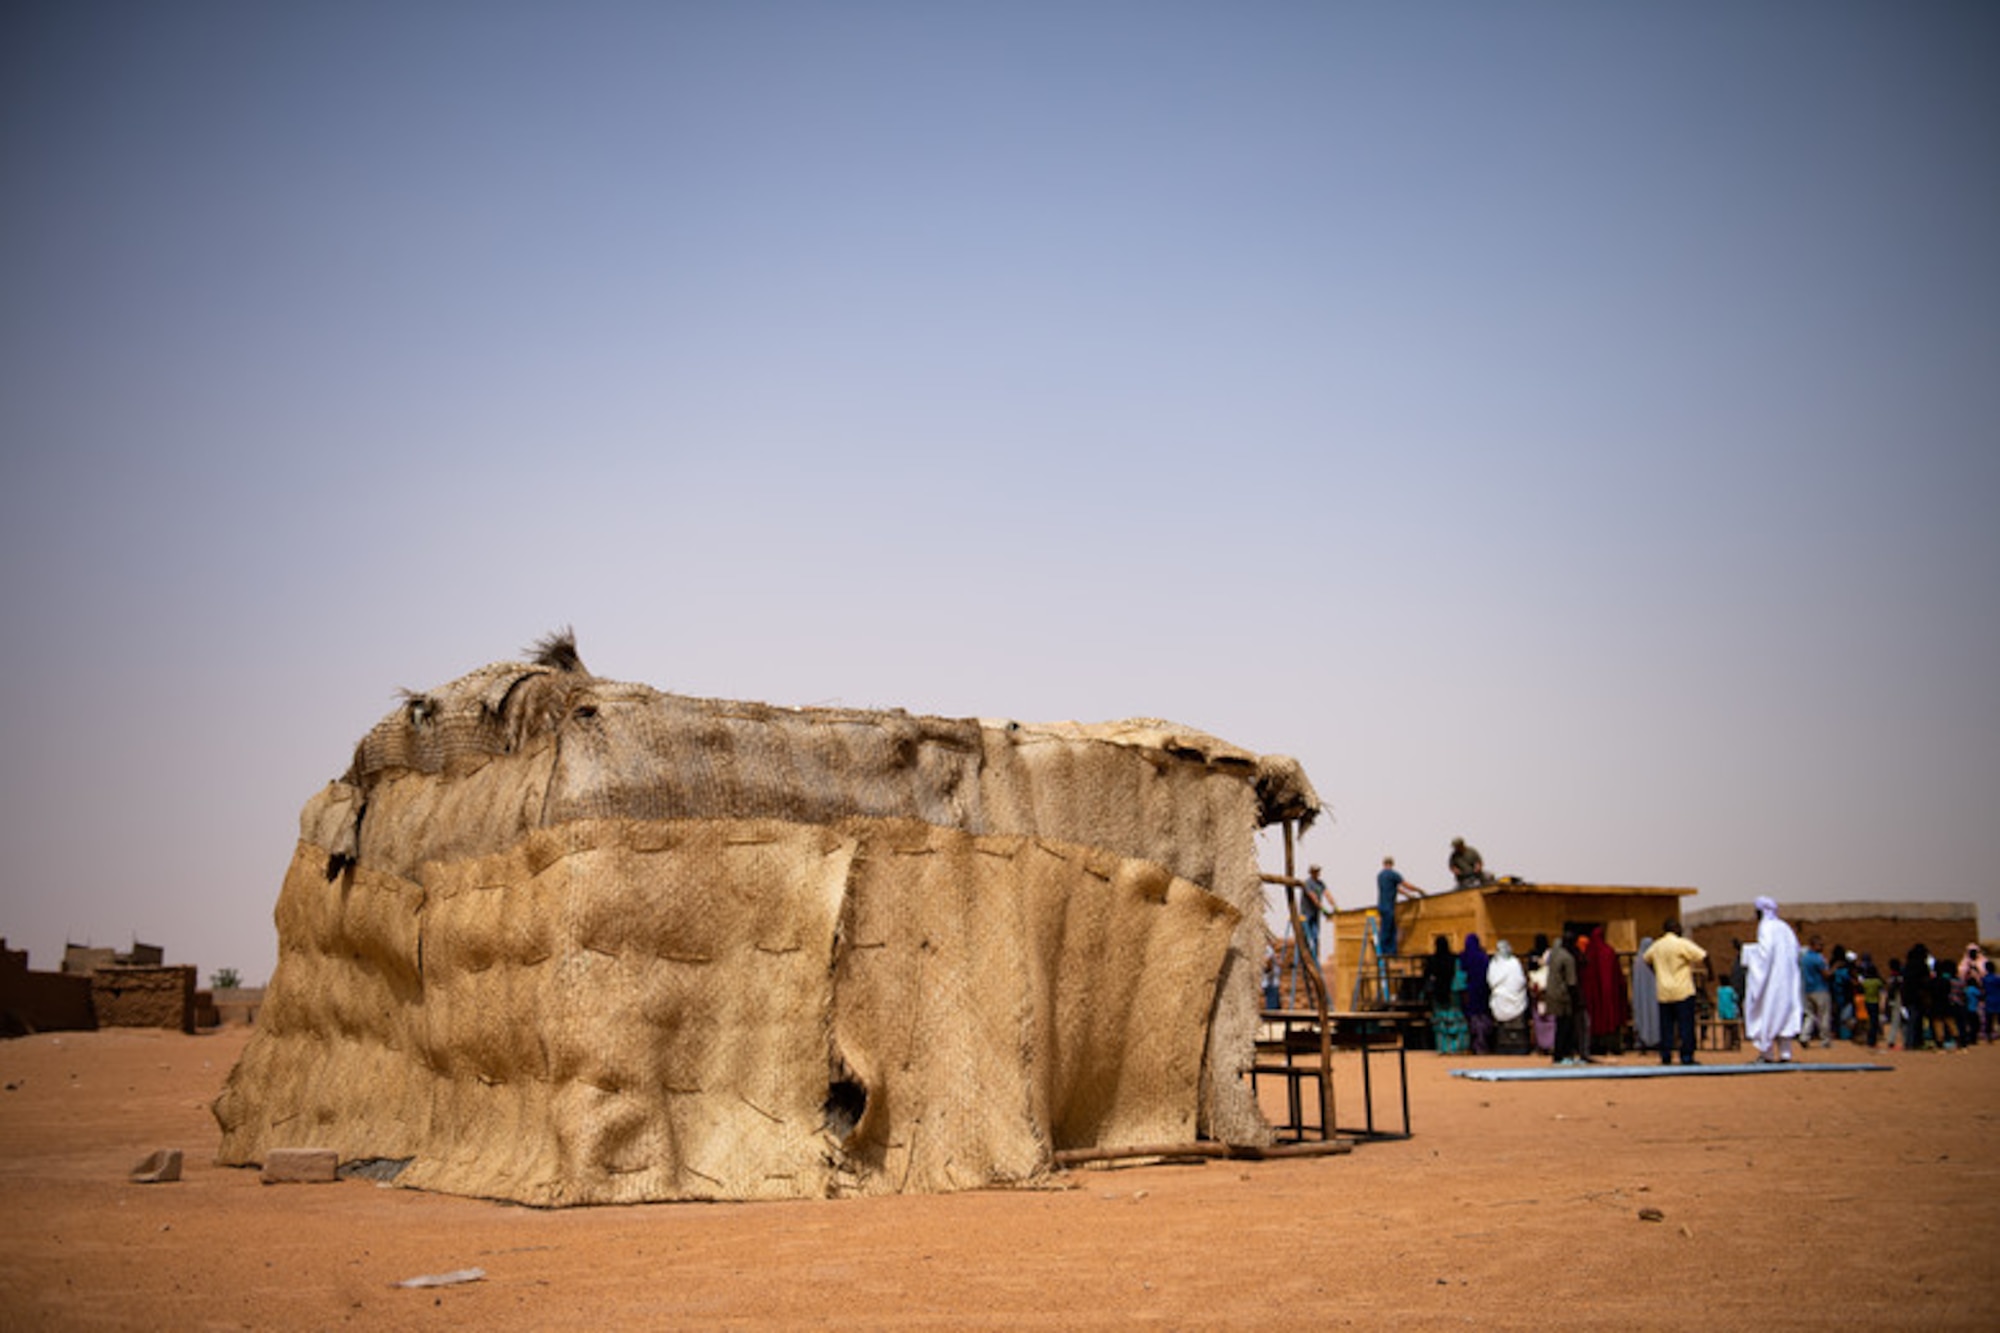 Wooden sticks and thatched roofing make up a classroom at a village in Agadez, Niger, June 27, 2019. The 724th Expeditionary Air Base Squadron civil engineer flight built the locals a new classroom made from stronger material and a tin roof to withstand the harsh conditions in Agadez. (U.S. Air Force photo by Staff Sgt. Devin Boyer)